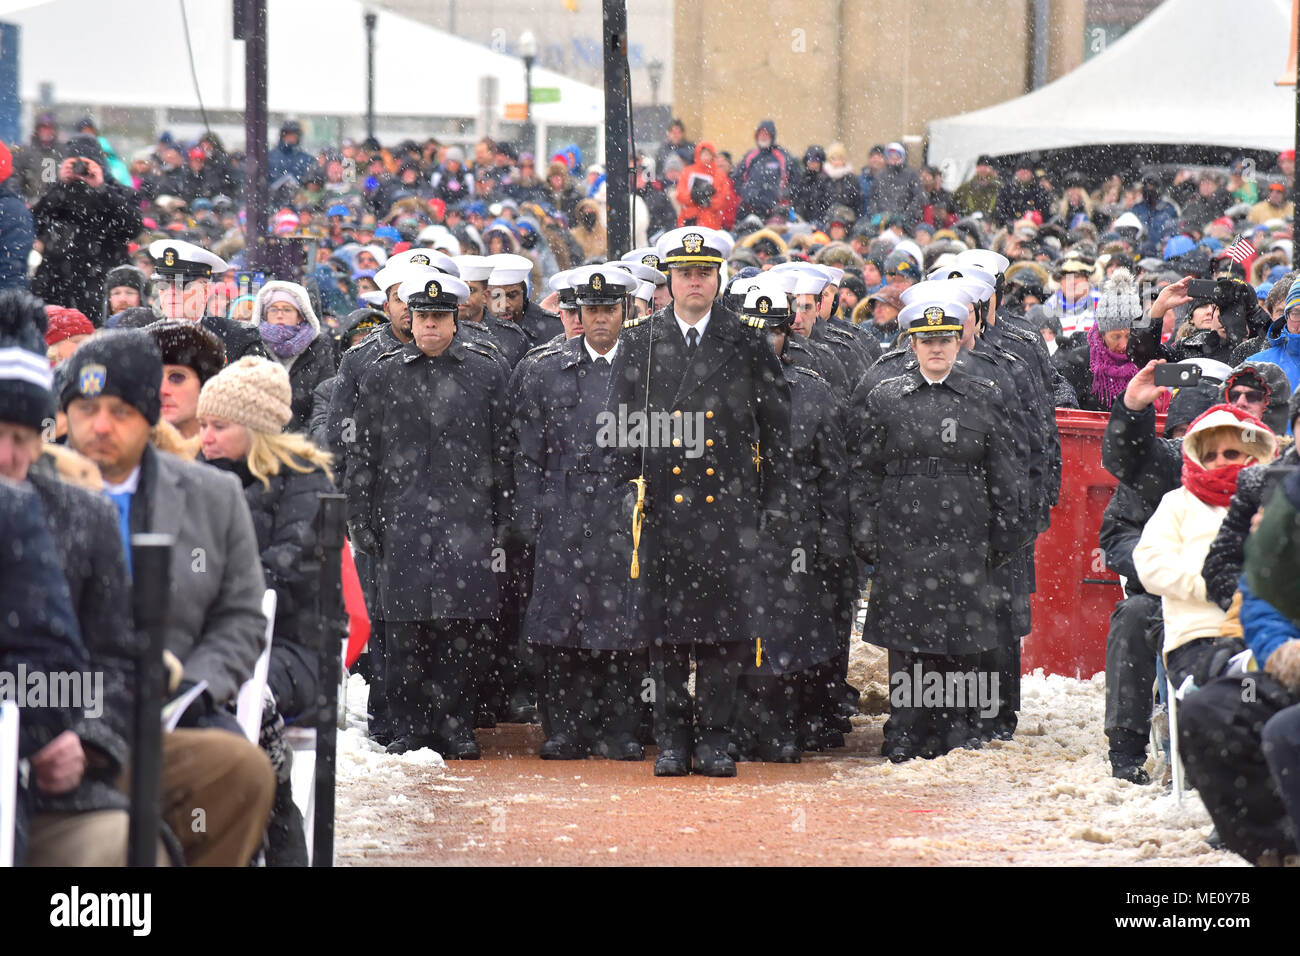 171216-N-N0101-106 BUFFALO, N.Y. (Dec. 16, 2017) The Blue crew of the freedom variant littoral combat ship USS Little Rock (LCS 9) stand in formation during the ship's commissioning ceremony Dec. 16, 2017 in Buffalo, N.Y. Little Rock is the fifth freedom-variant LCS to join the fleet. The fast, shallow-draft vessel has a modular design capable of implementing a variety of mission packages as an asset to the fleet in both the shallow coastal regions as well as trans-Atlantic service. (U.S. Navy photo courtesy of Lockheed Martin/Released) Stock Photo